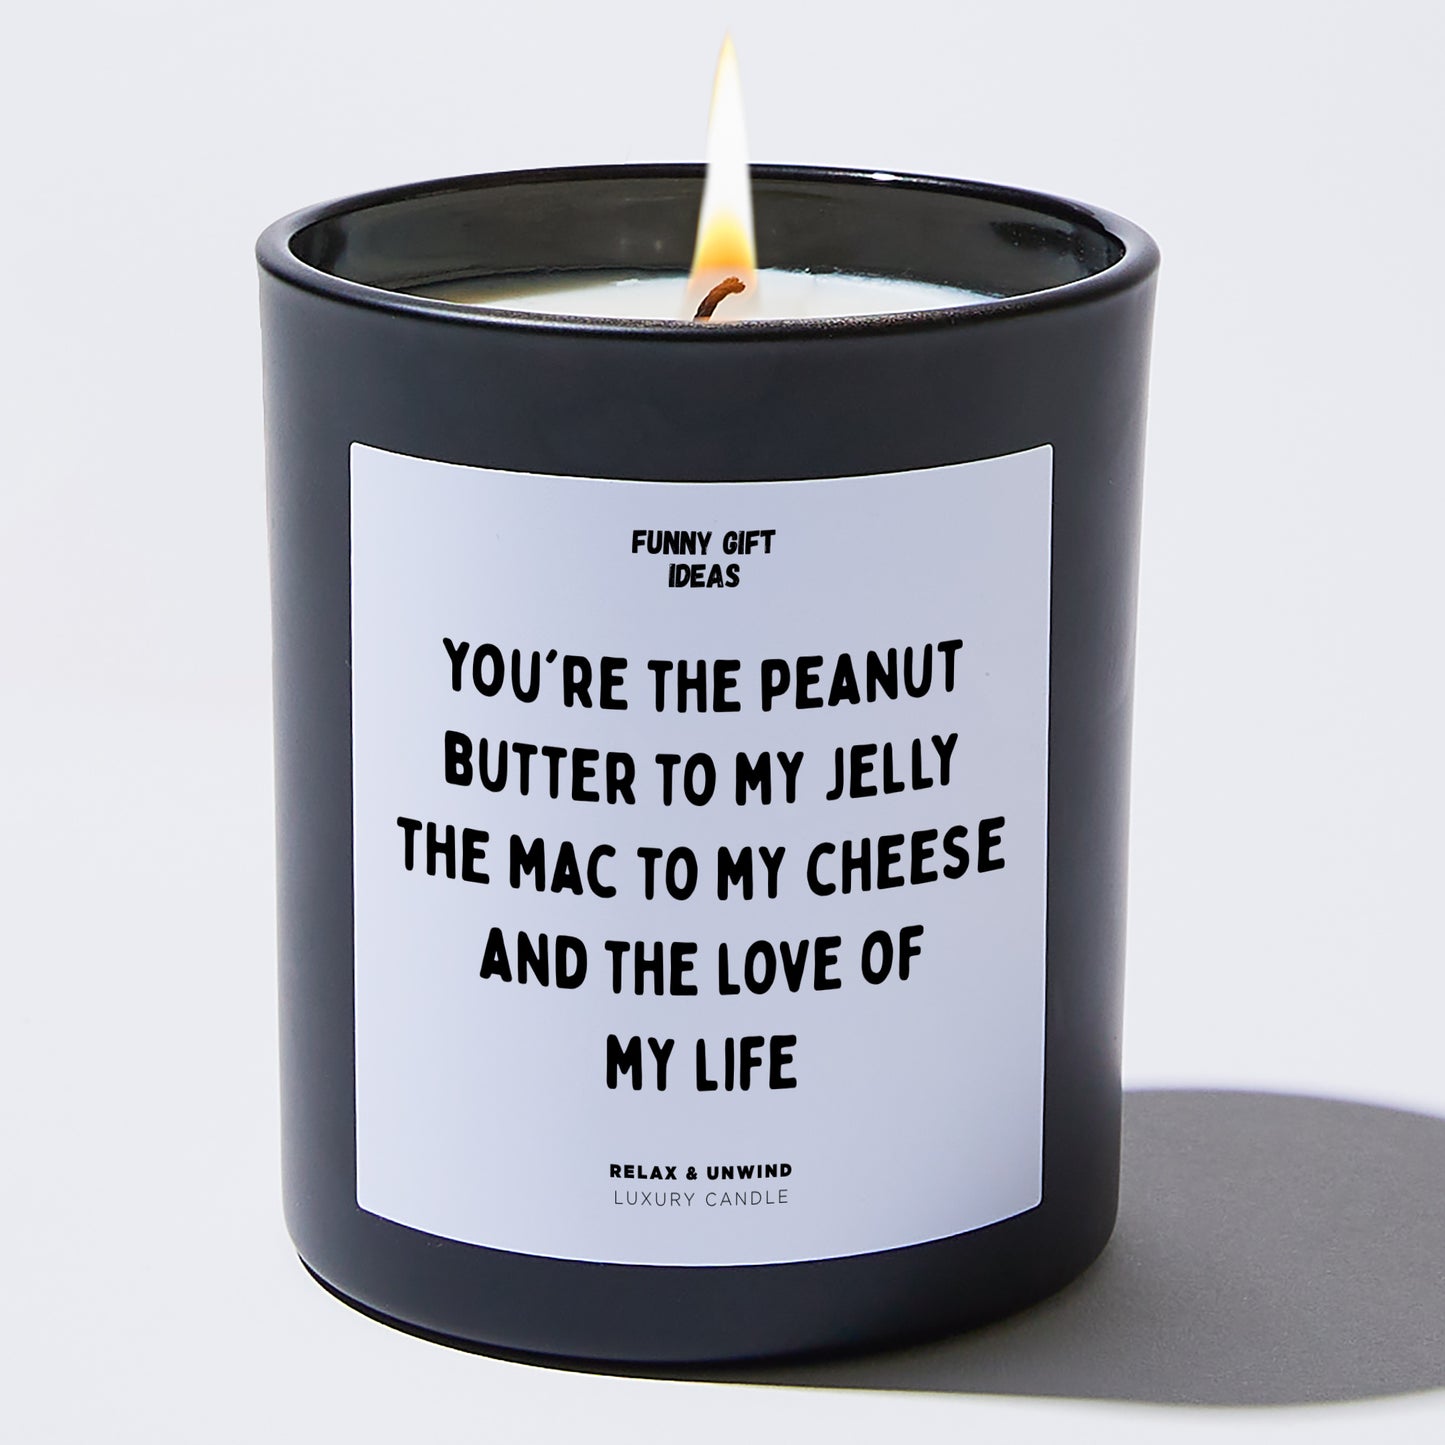 Anniversary You're the Peanut Butter to My Jelly, the Mac to My Cheese, and the Love of My Life. - Funny Gift Ideas